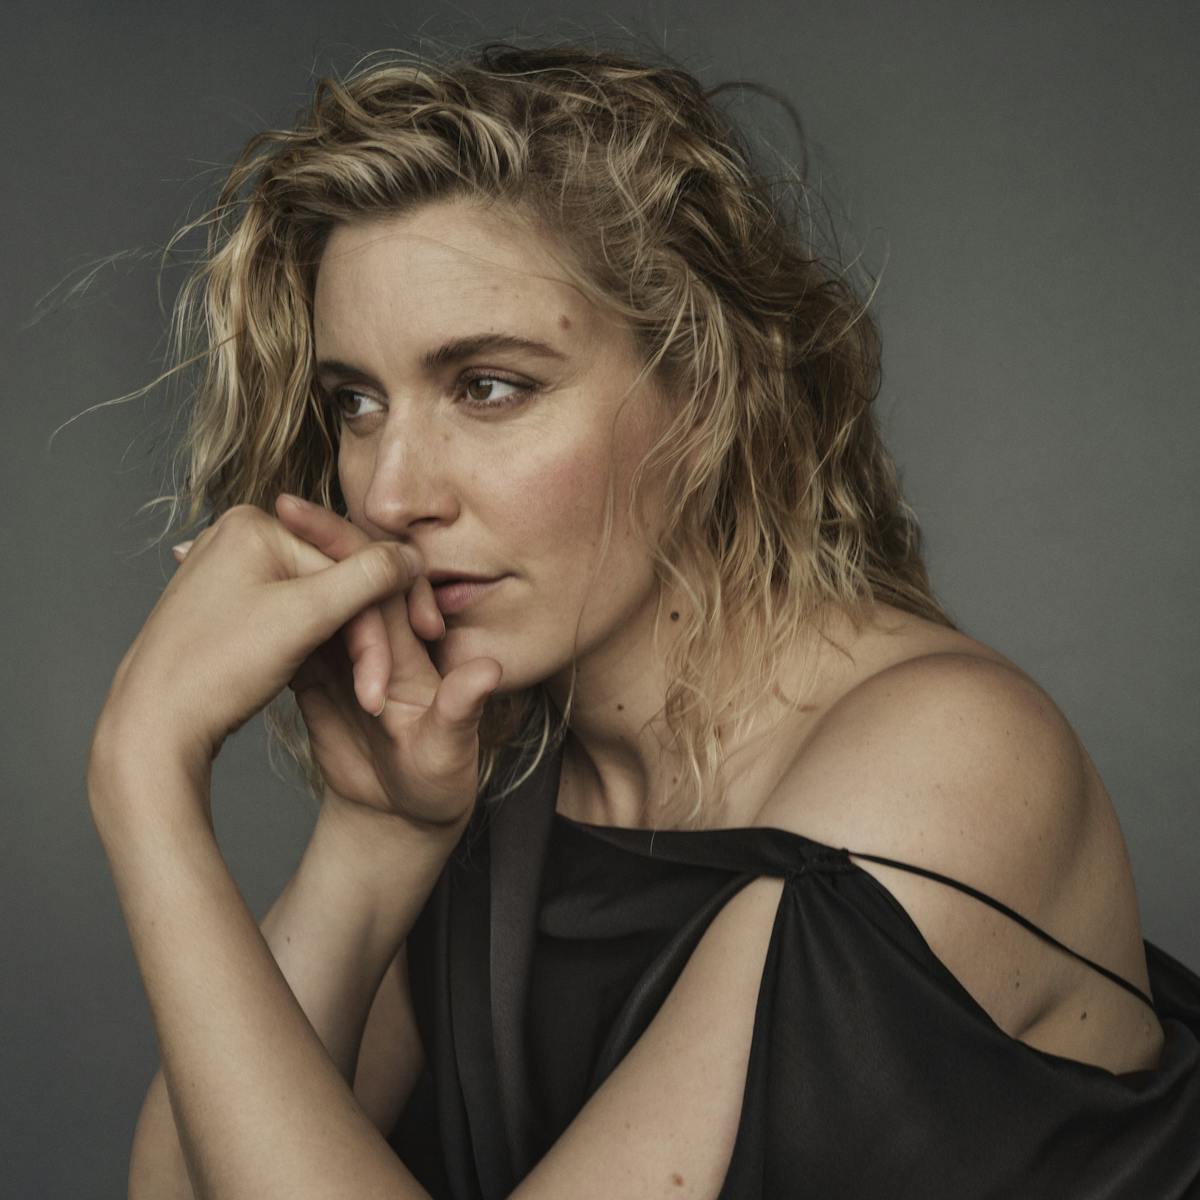 Greta Gerwig wears a black strapless top and rests her chin on her folded hands.